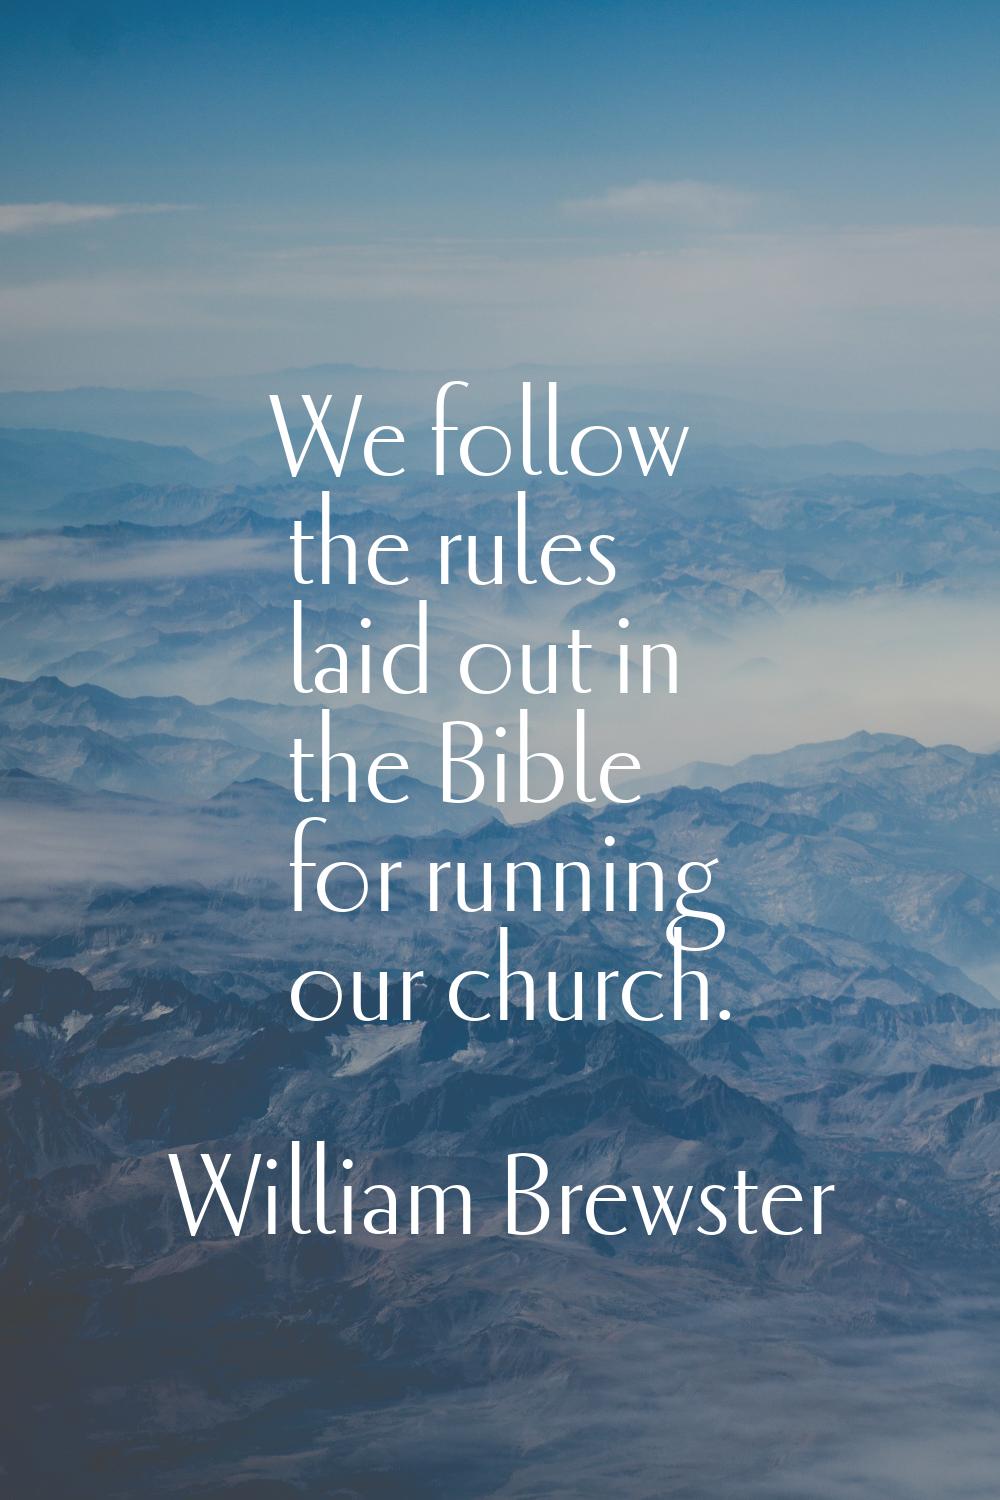 We follow the rules laid out in the Bible for running our church.